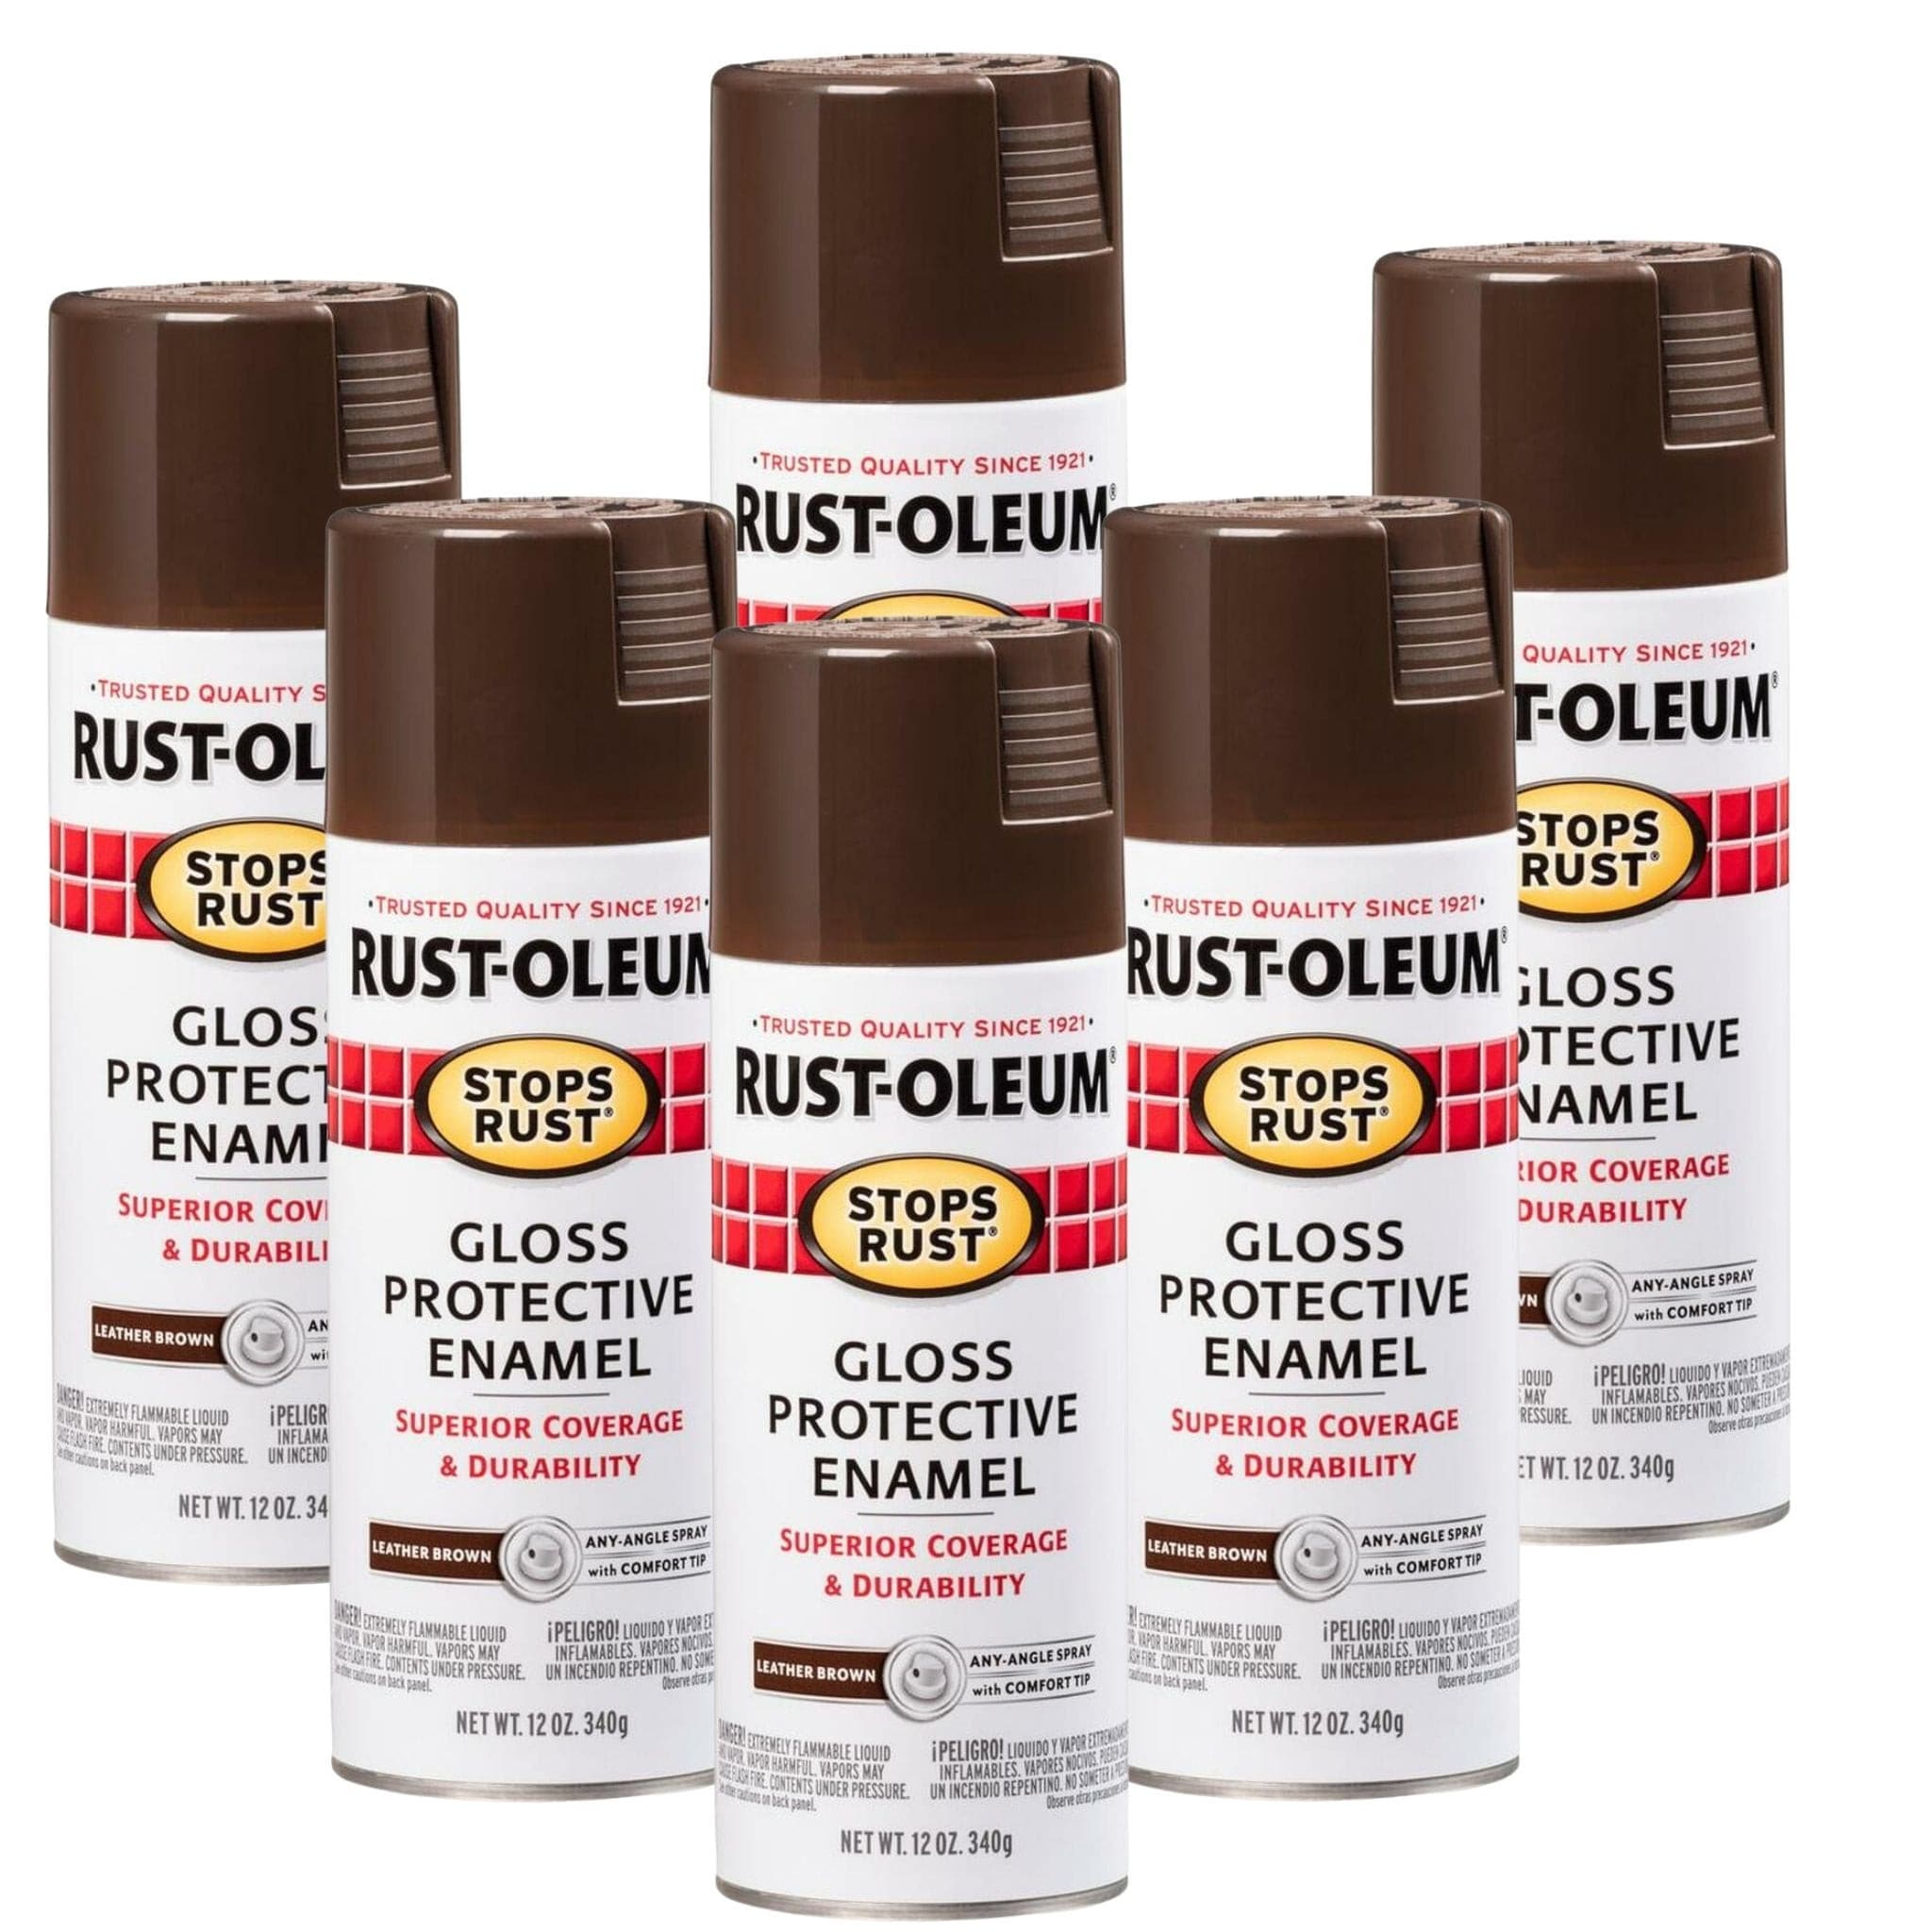 Ace Rust Stop Gloss Leather Brown Protective Enamel Spray Paint 15